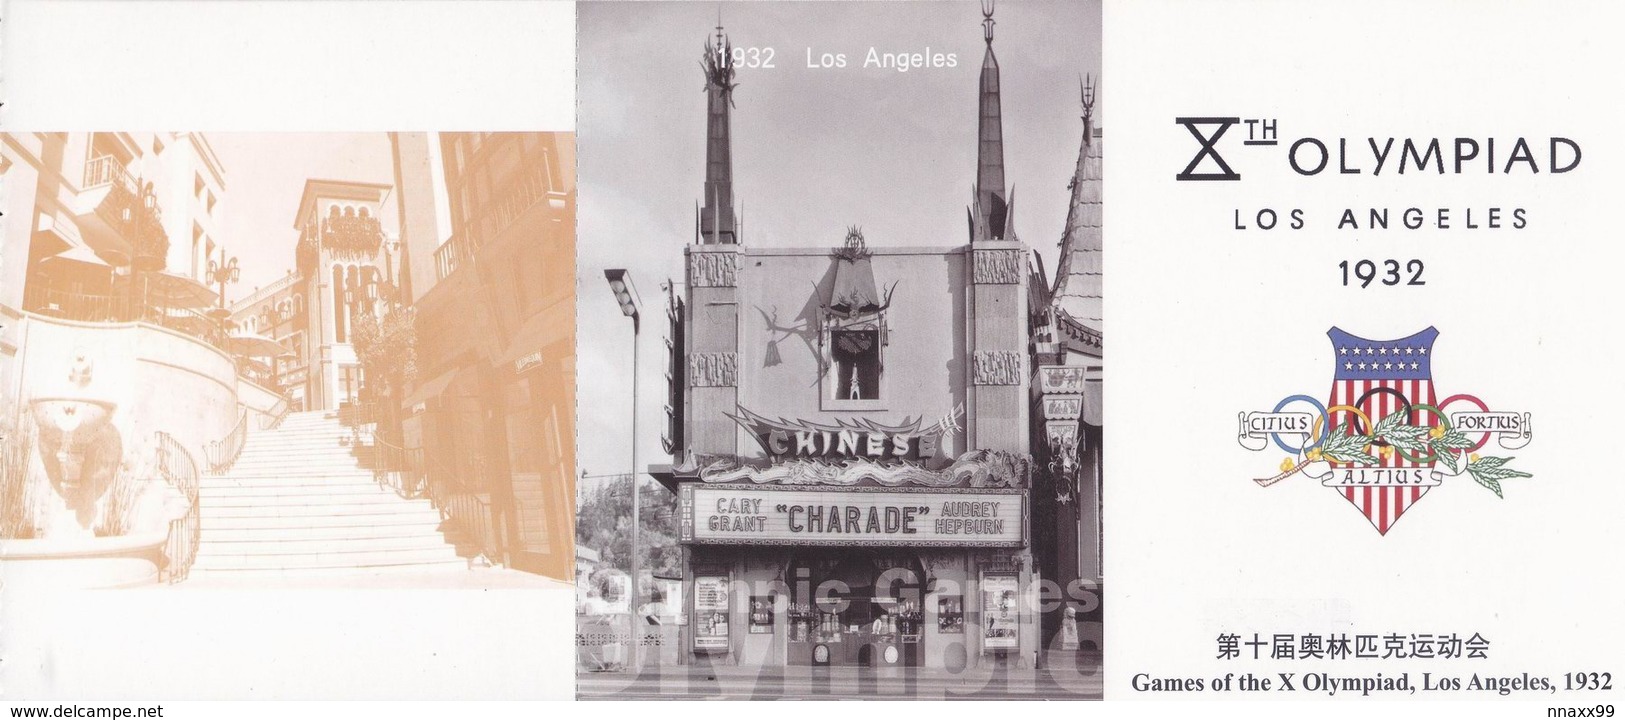 USA - 1932 Los Angeles OG, Grauman's Chinese Theatre & Olympic Logo, W/ Spanish Steps In Rodeo Dr, China's Prepaid Card - Ete 1932: Los Angeles